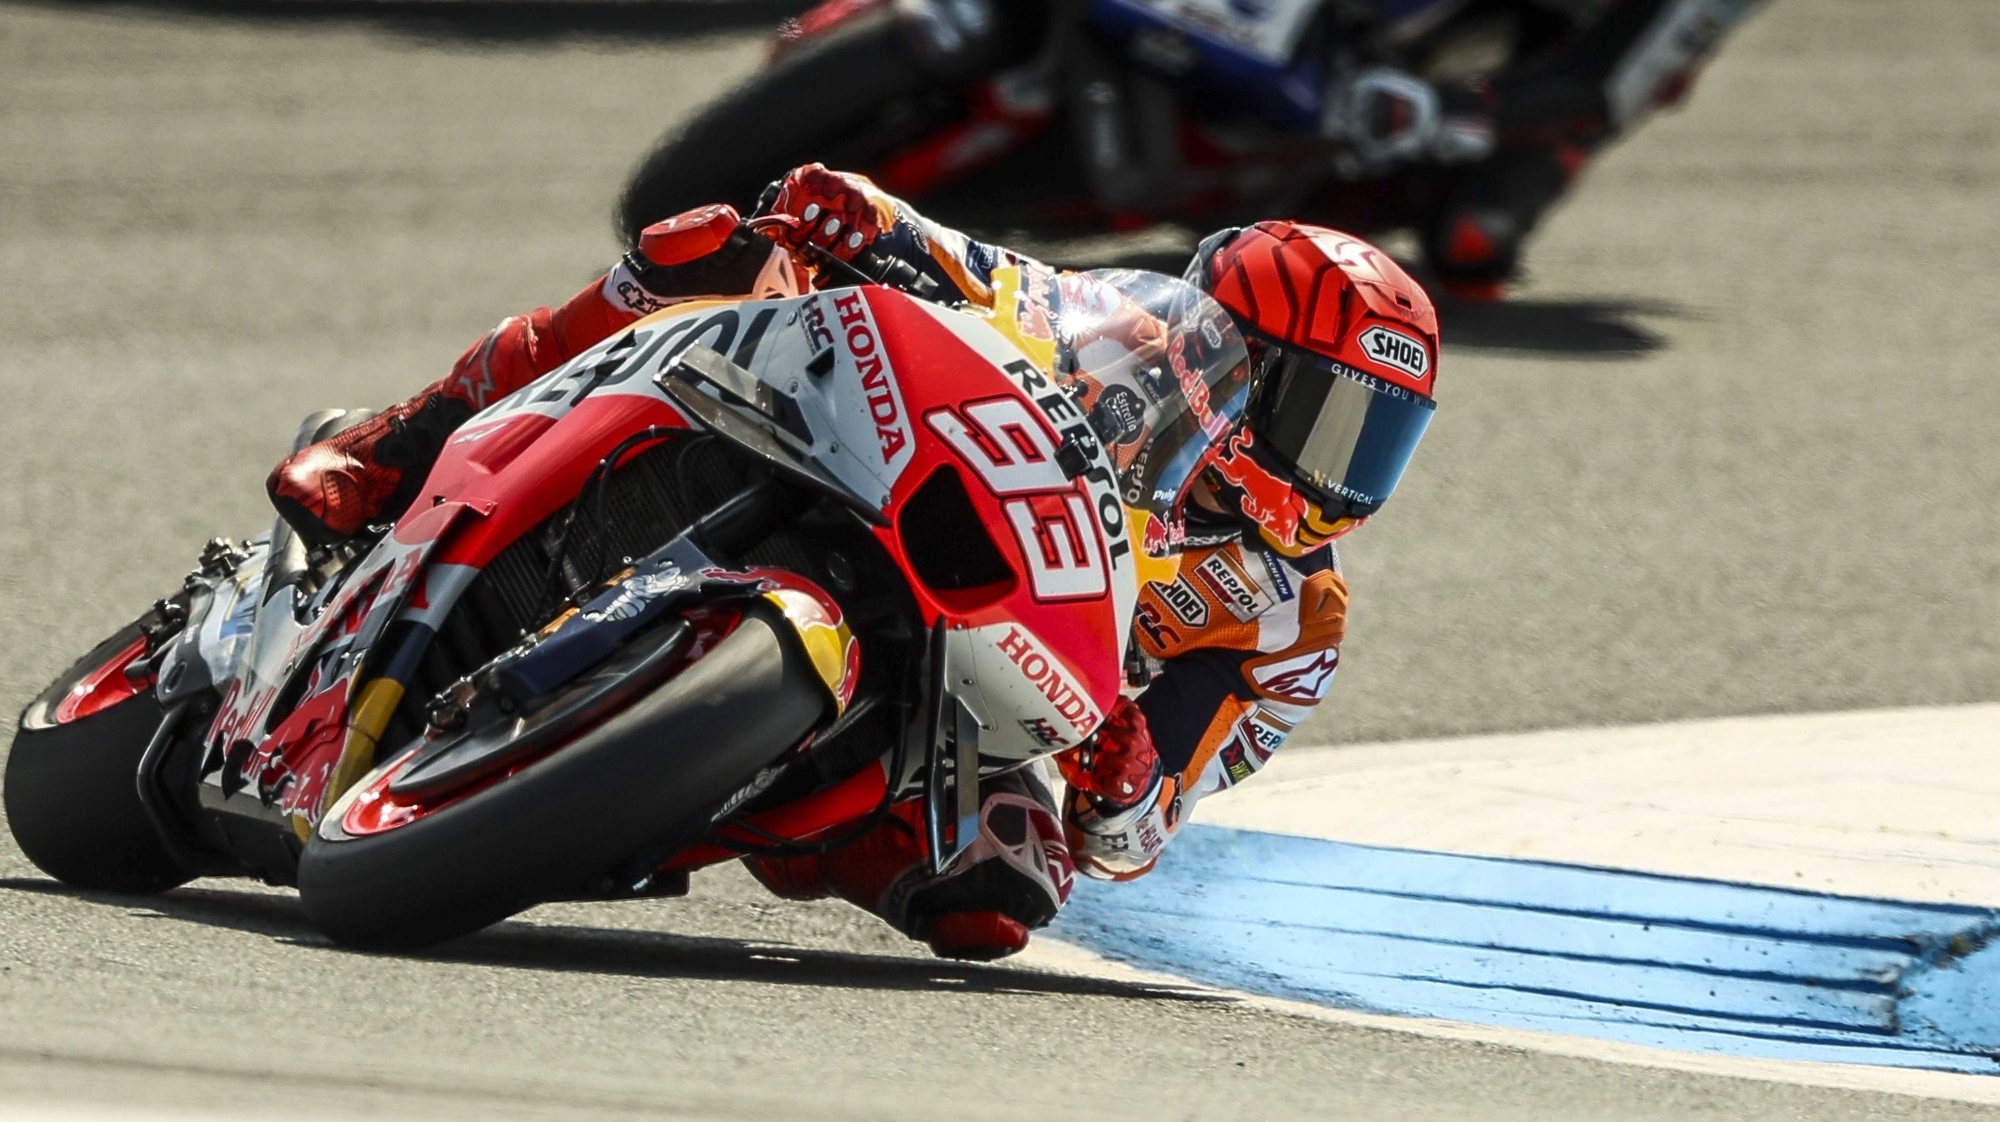 epa10707828 Spanish MotoGP rider Marc Marquez of Repsol Honda takes a bend during the first free practice session of the motorcycling Grand Prix TT Assen at the TT Circuit Assen, the Netherlands, 23 June 2023.  EPA/VINCENT JANNINK